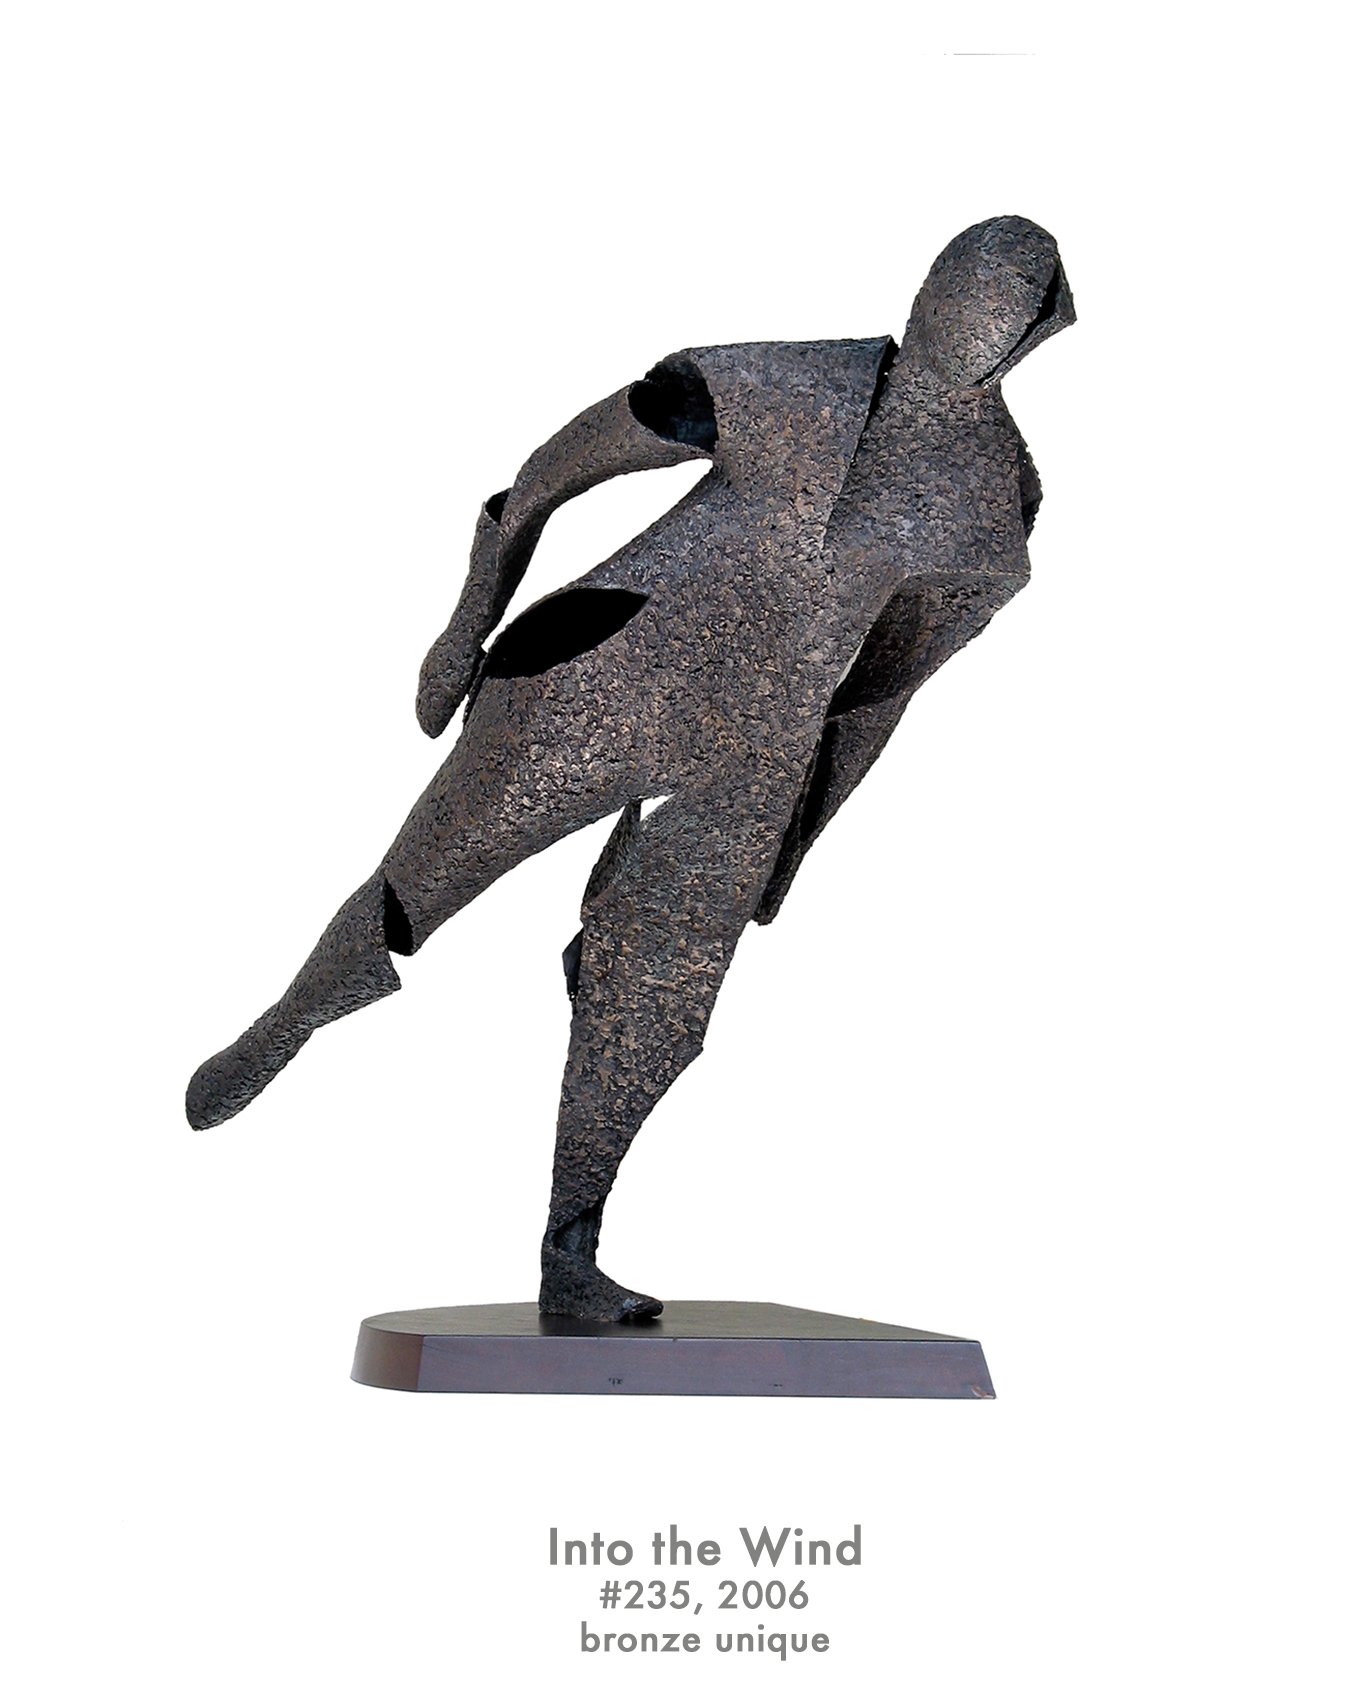 Into the Wind, 2006, bronze, #235